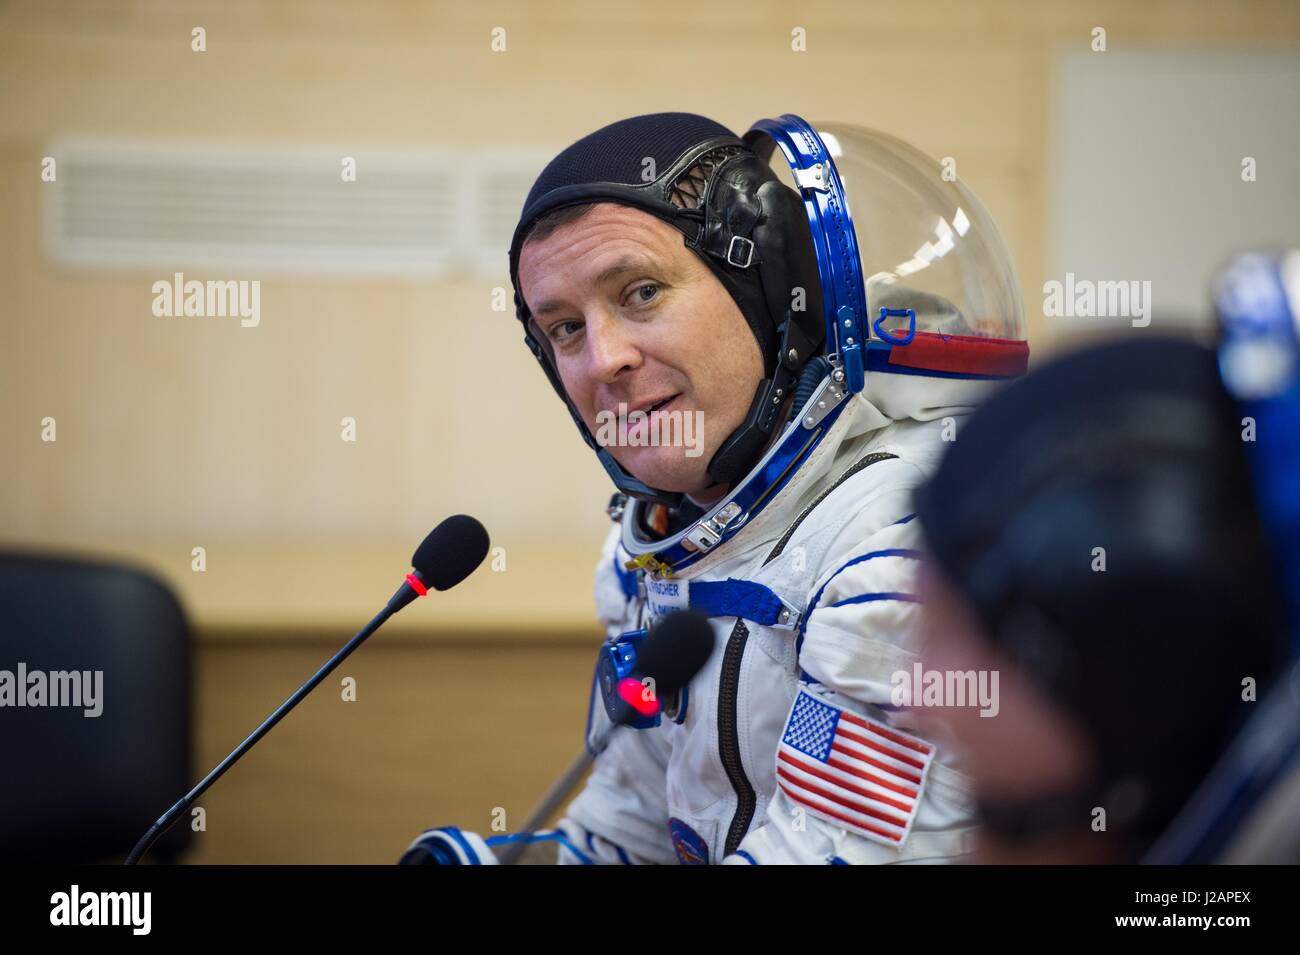 NASA International Space Station Expedition 51 prime crew member American astronaut Jack Fischer speaks with his family after having his Russian Sokol launch and entry spacesuit pressure-checked in preparation for the Soyuz MS-04 launch at the Baikonur Cosmodrome April 20, 2017 in Baikonur, Kazakhstan.     (photo by Aubrey Gemignani /NASA  via Planetpix) Stock Photo